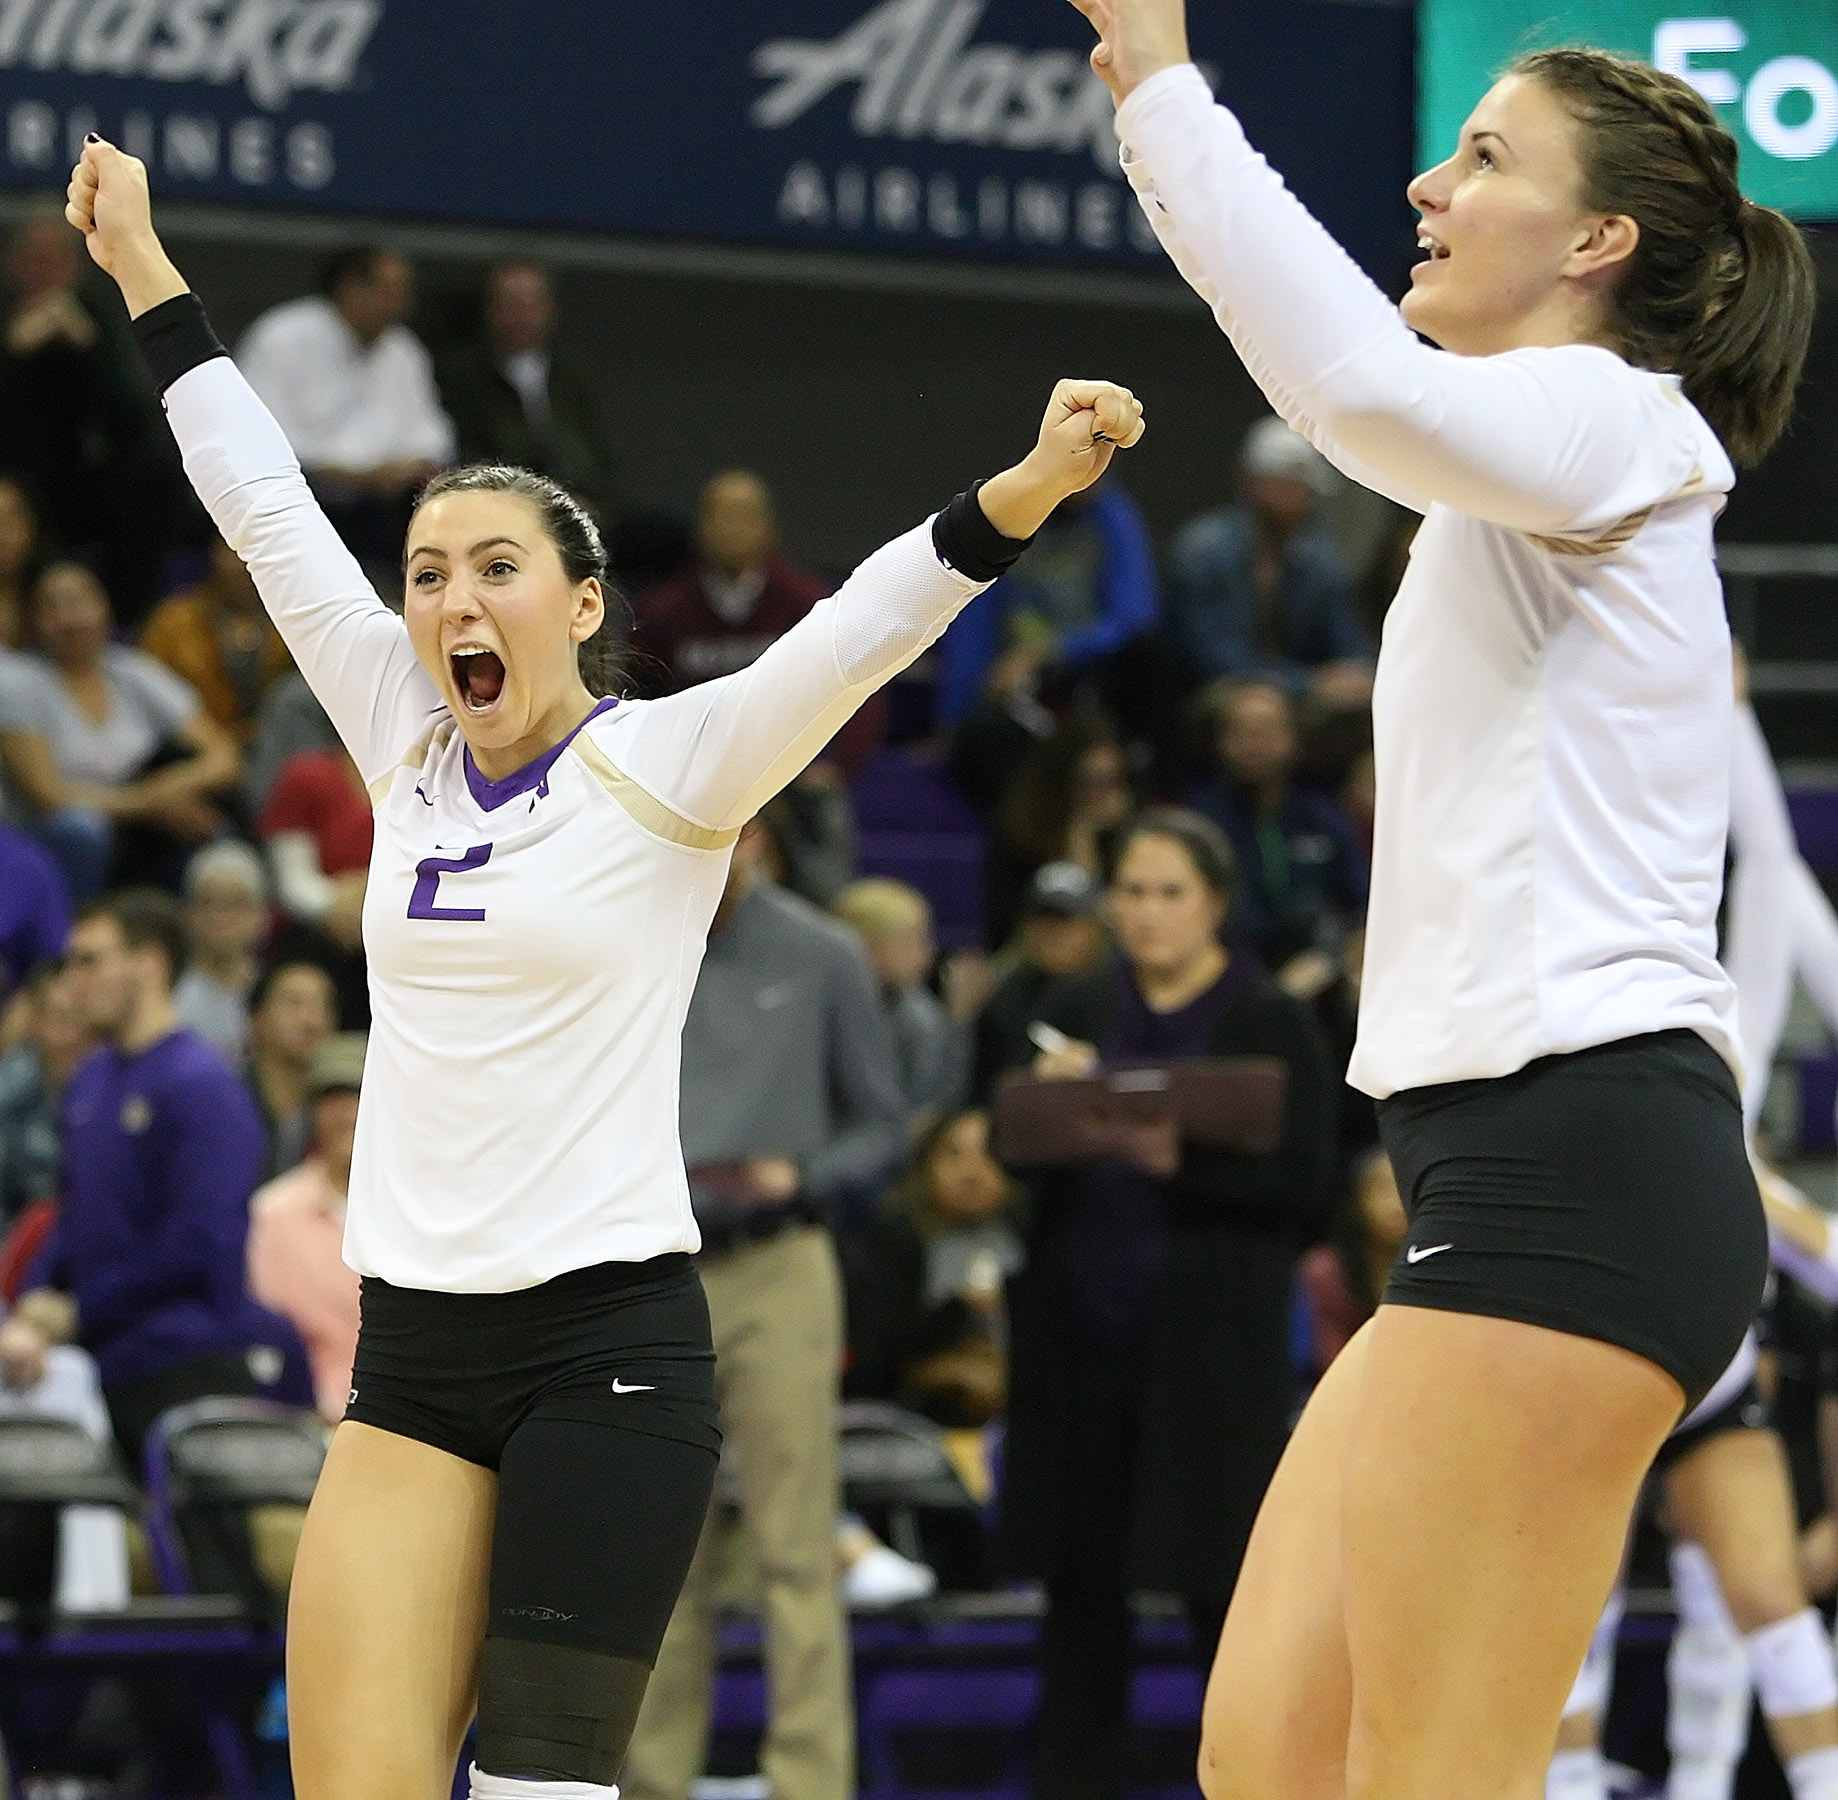 Shayne McPherson (left) of Washington shows her excitement after the Huskies score.